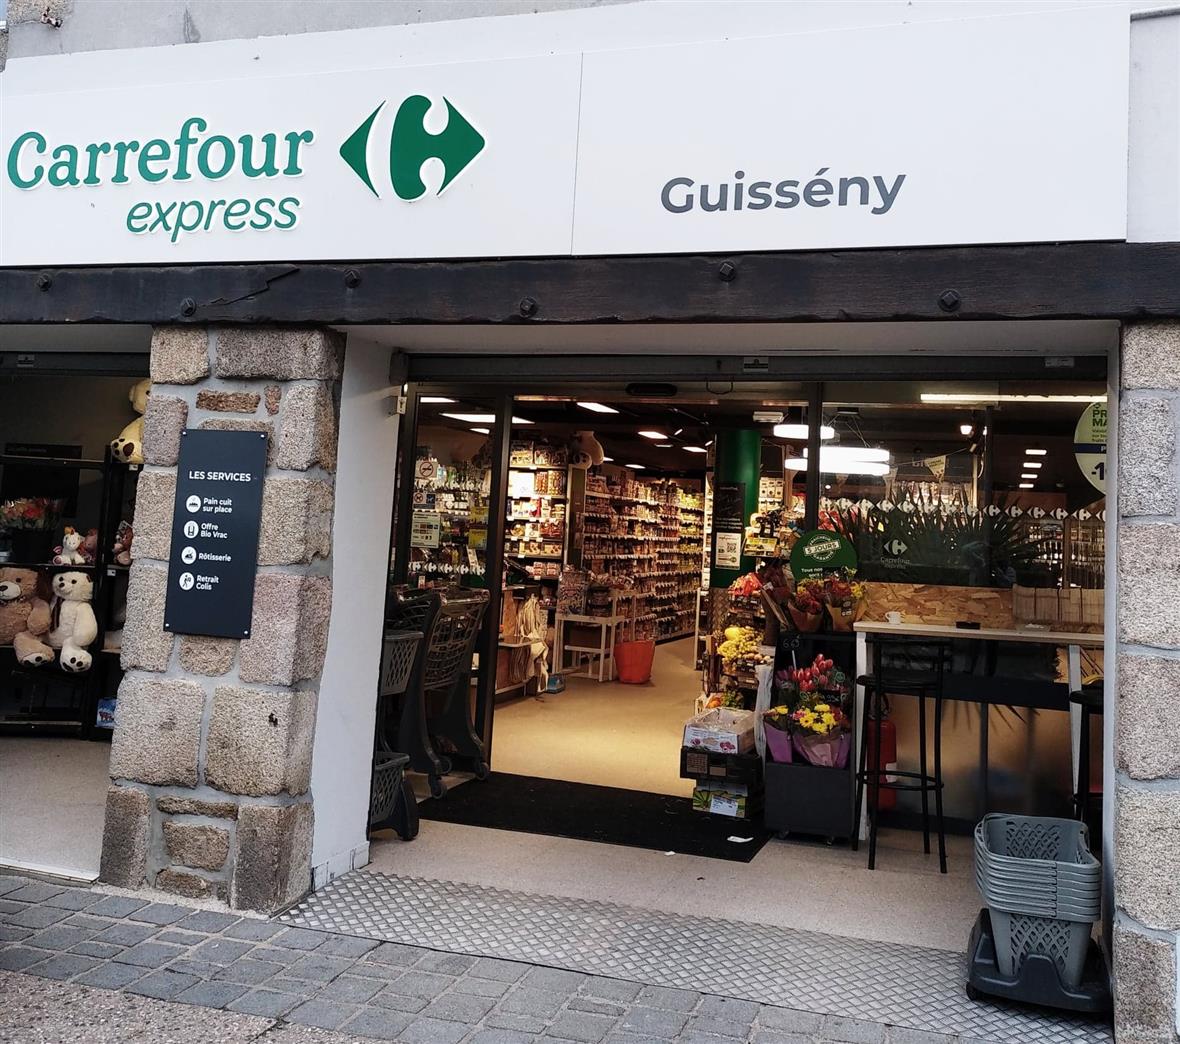 Carrefour Express_Guisseny